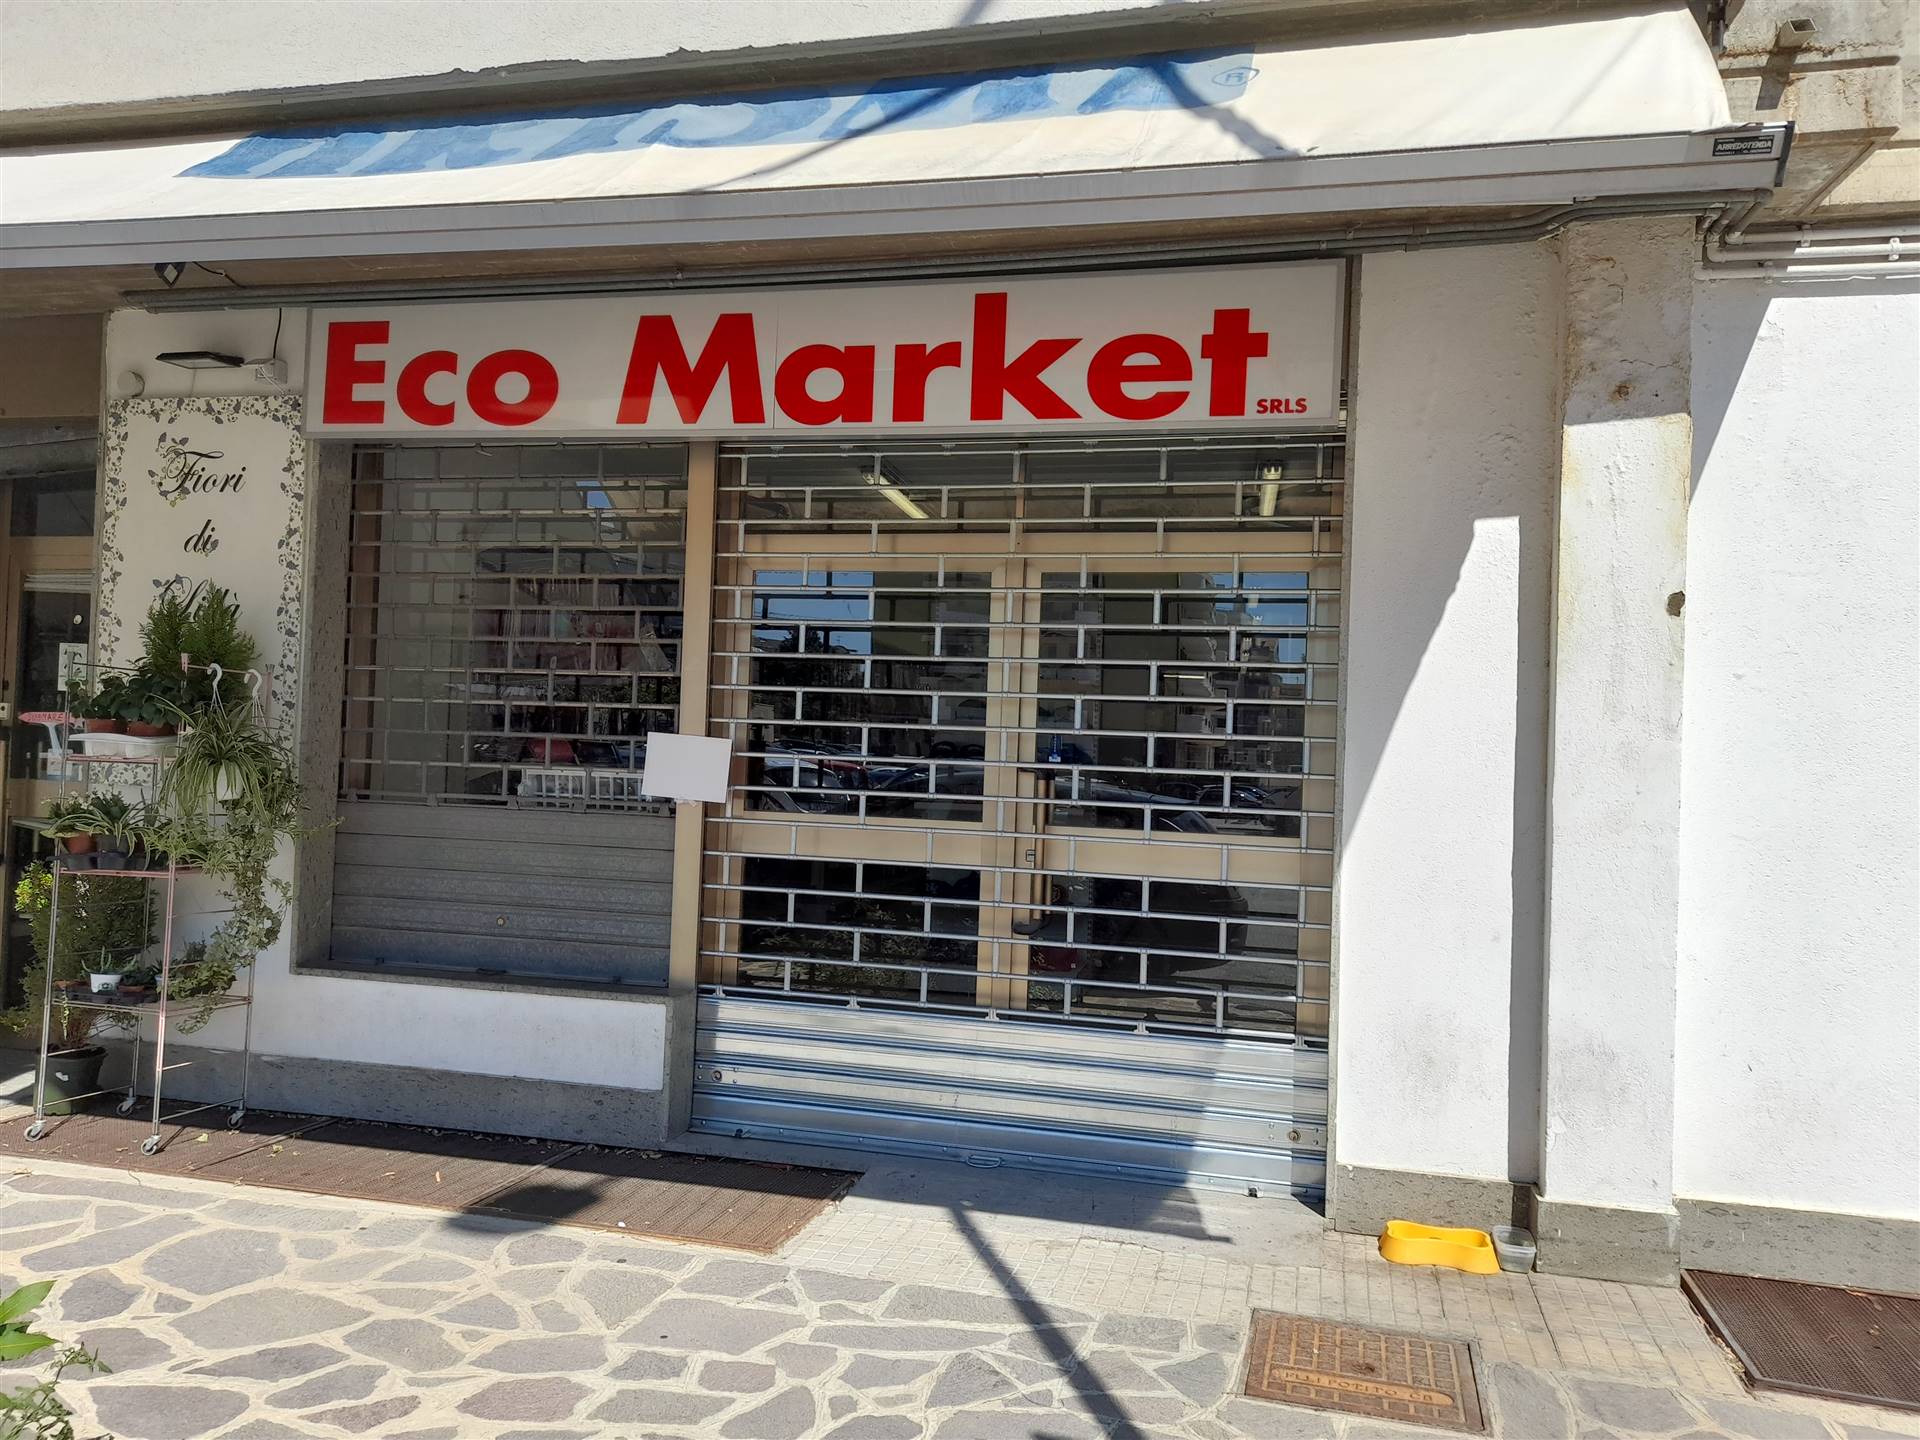 SEMICENTRO, VASTO, Commercial property for rent of 150 Sq. mt., Energetic class: G, Epi: 1 kwh/m3 year, placed at Ground, composed by: 1 Room, 1 